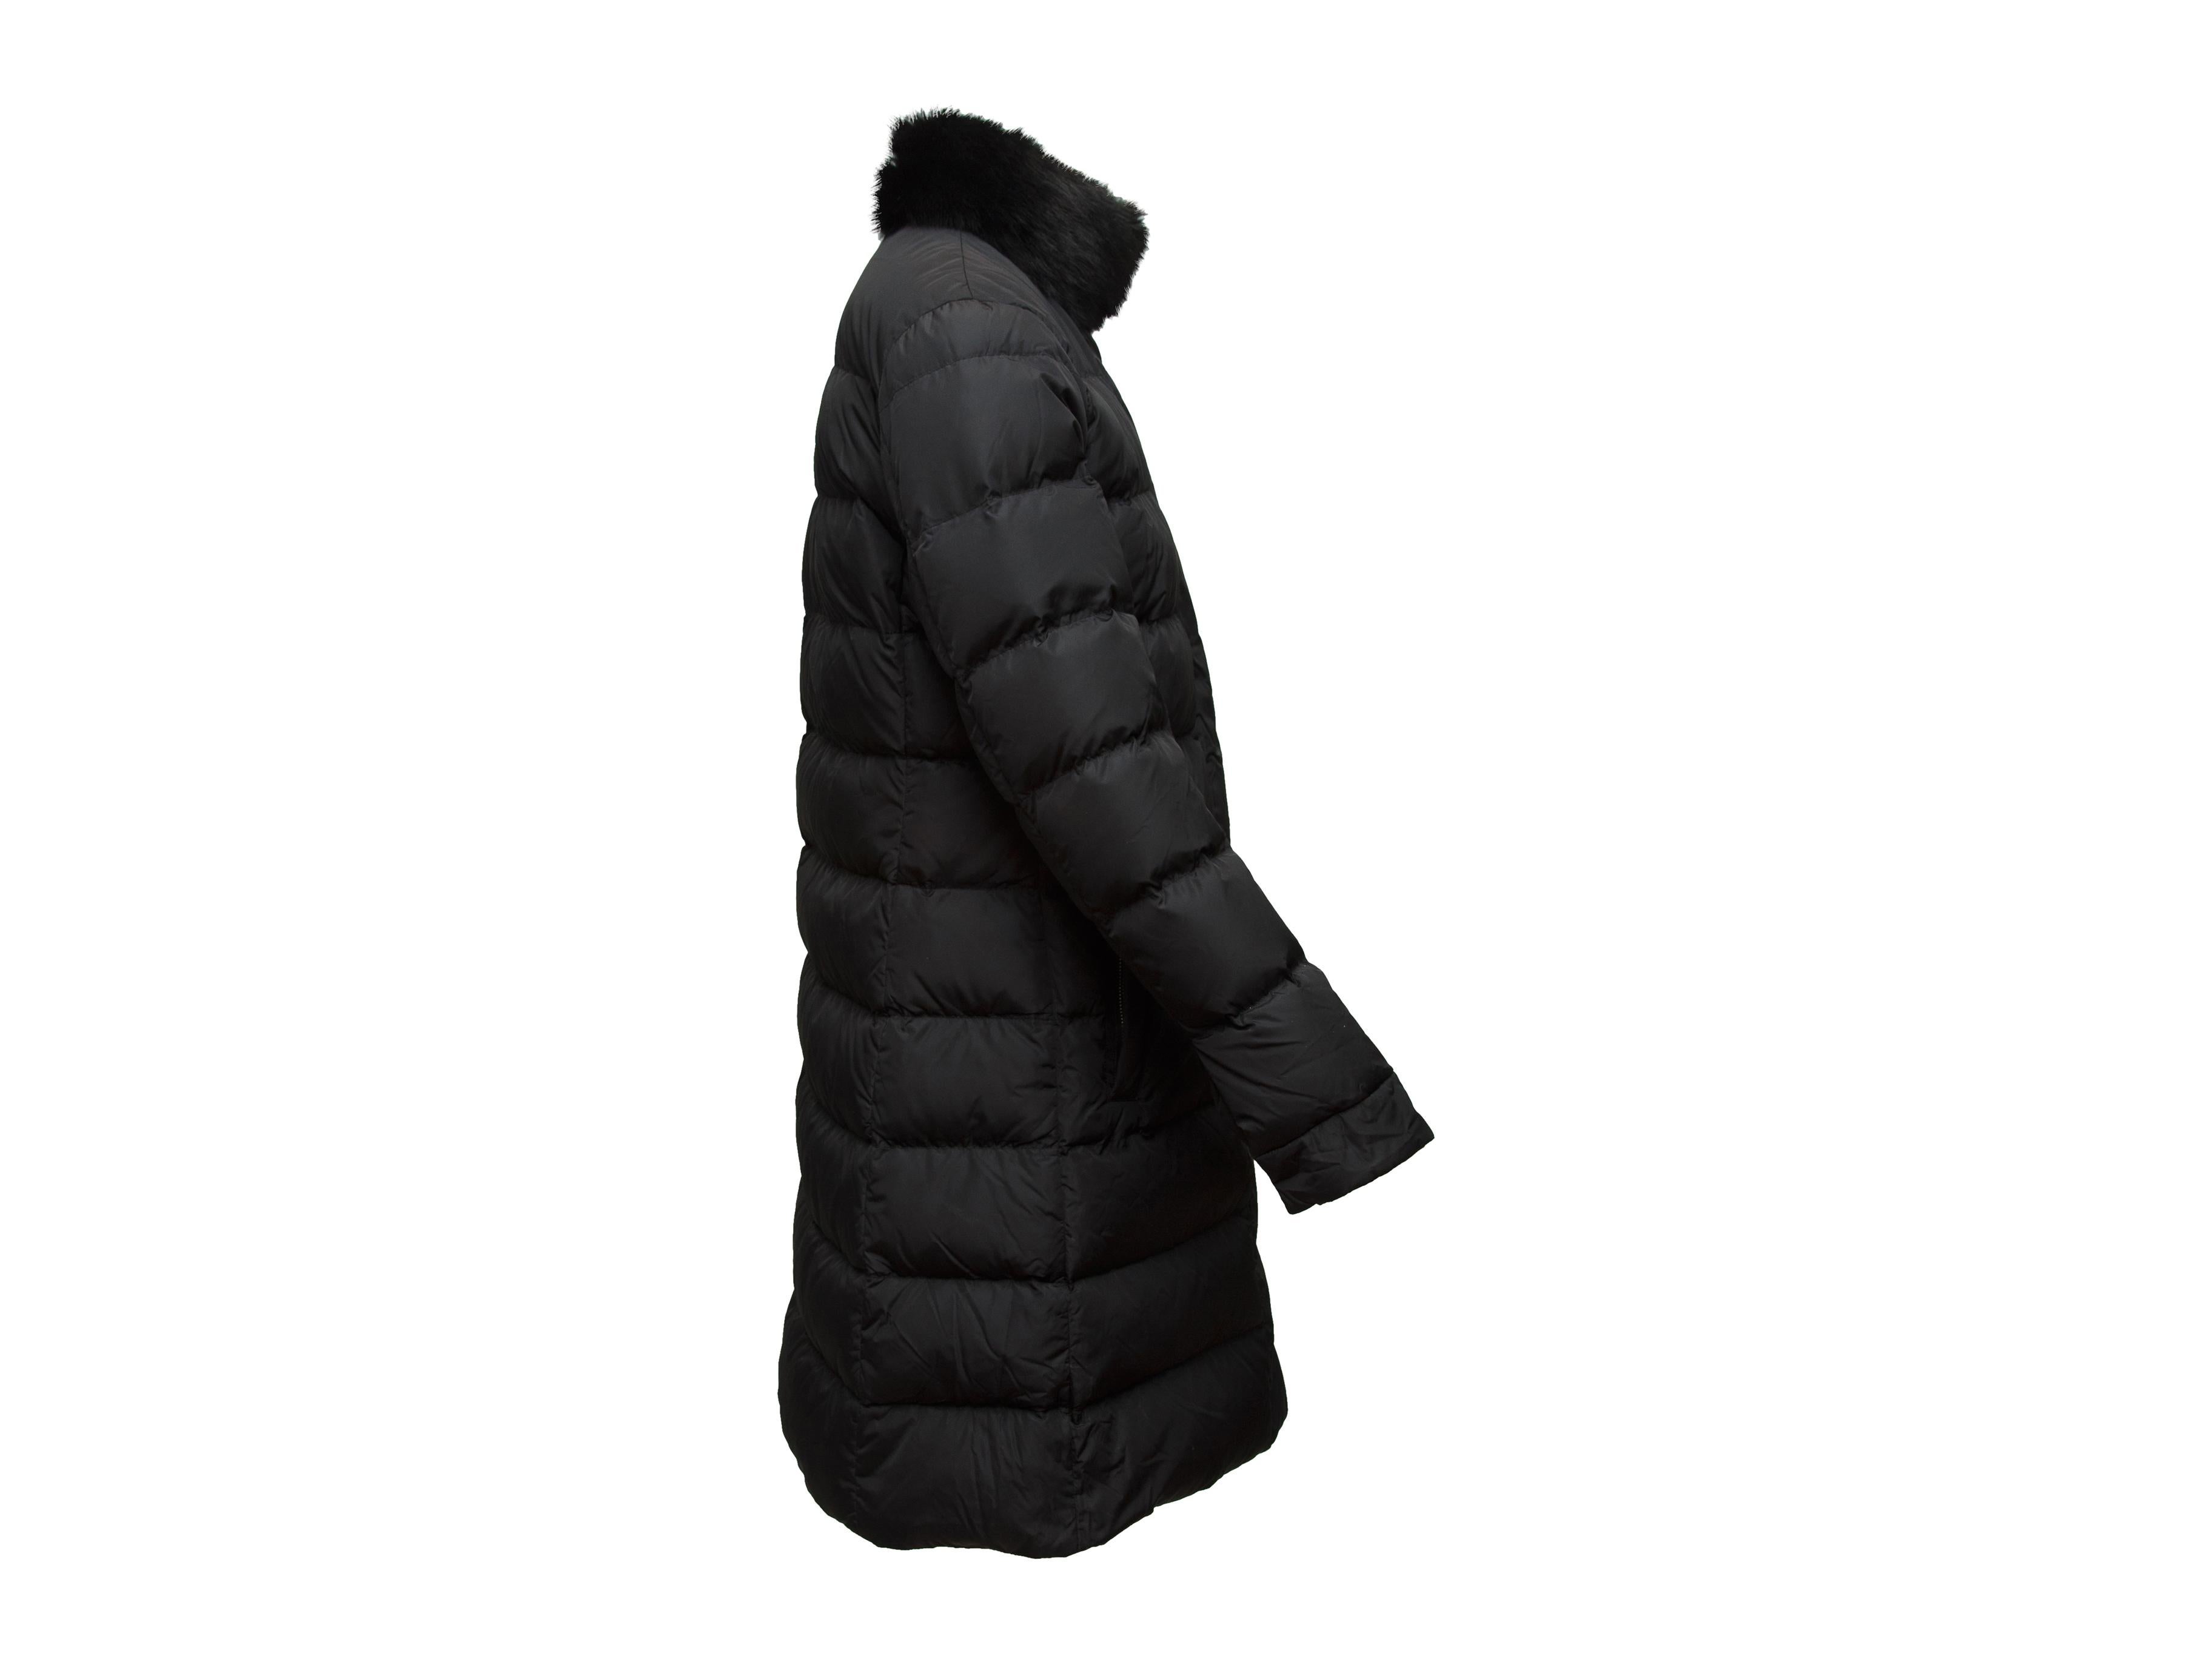 Product details: Black mid-length puffer coat by Prada. Fur trim at high collar. Dual pockets at hips. Zip closure at front. Designer size 44. 35